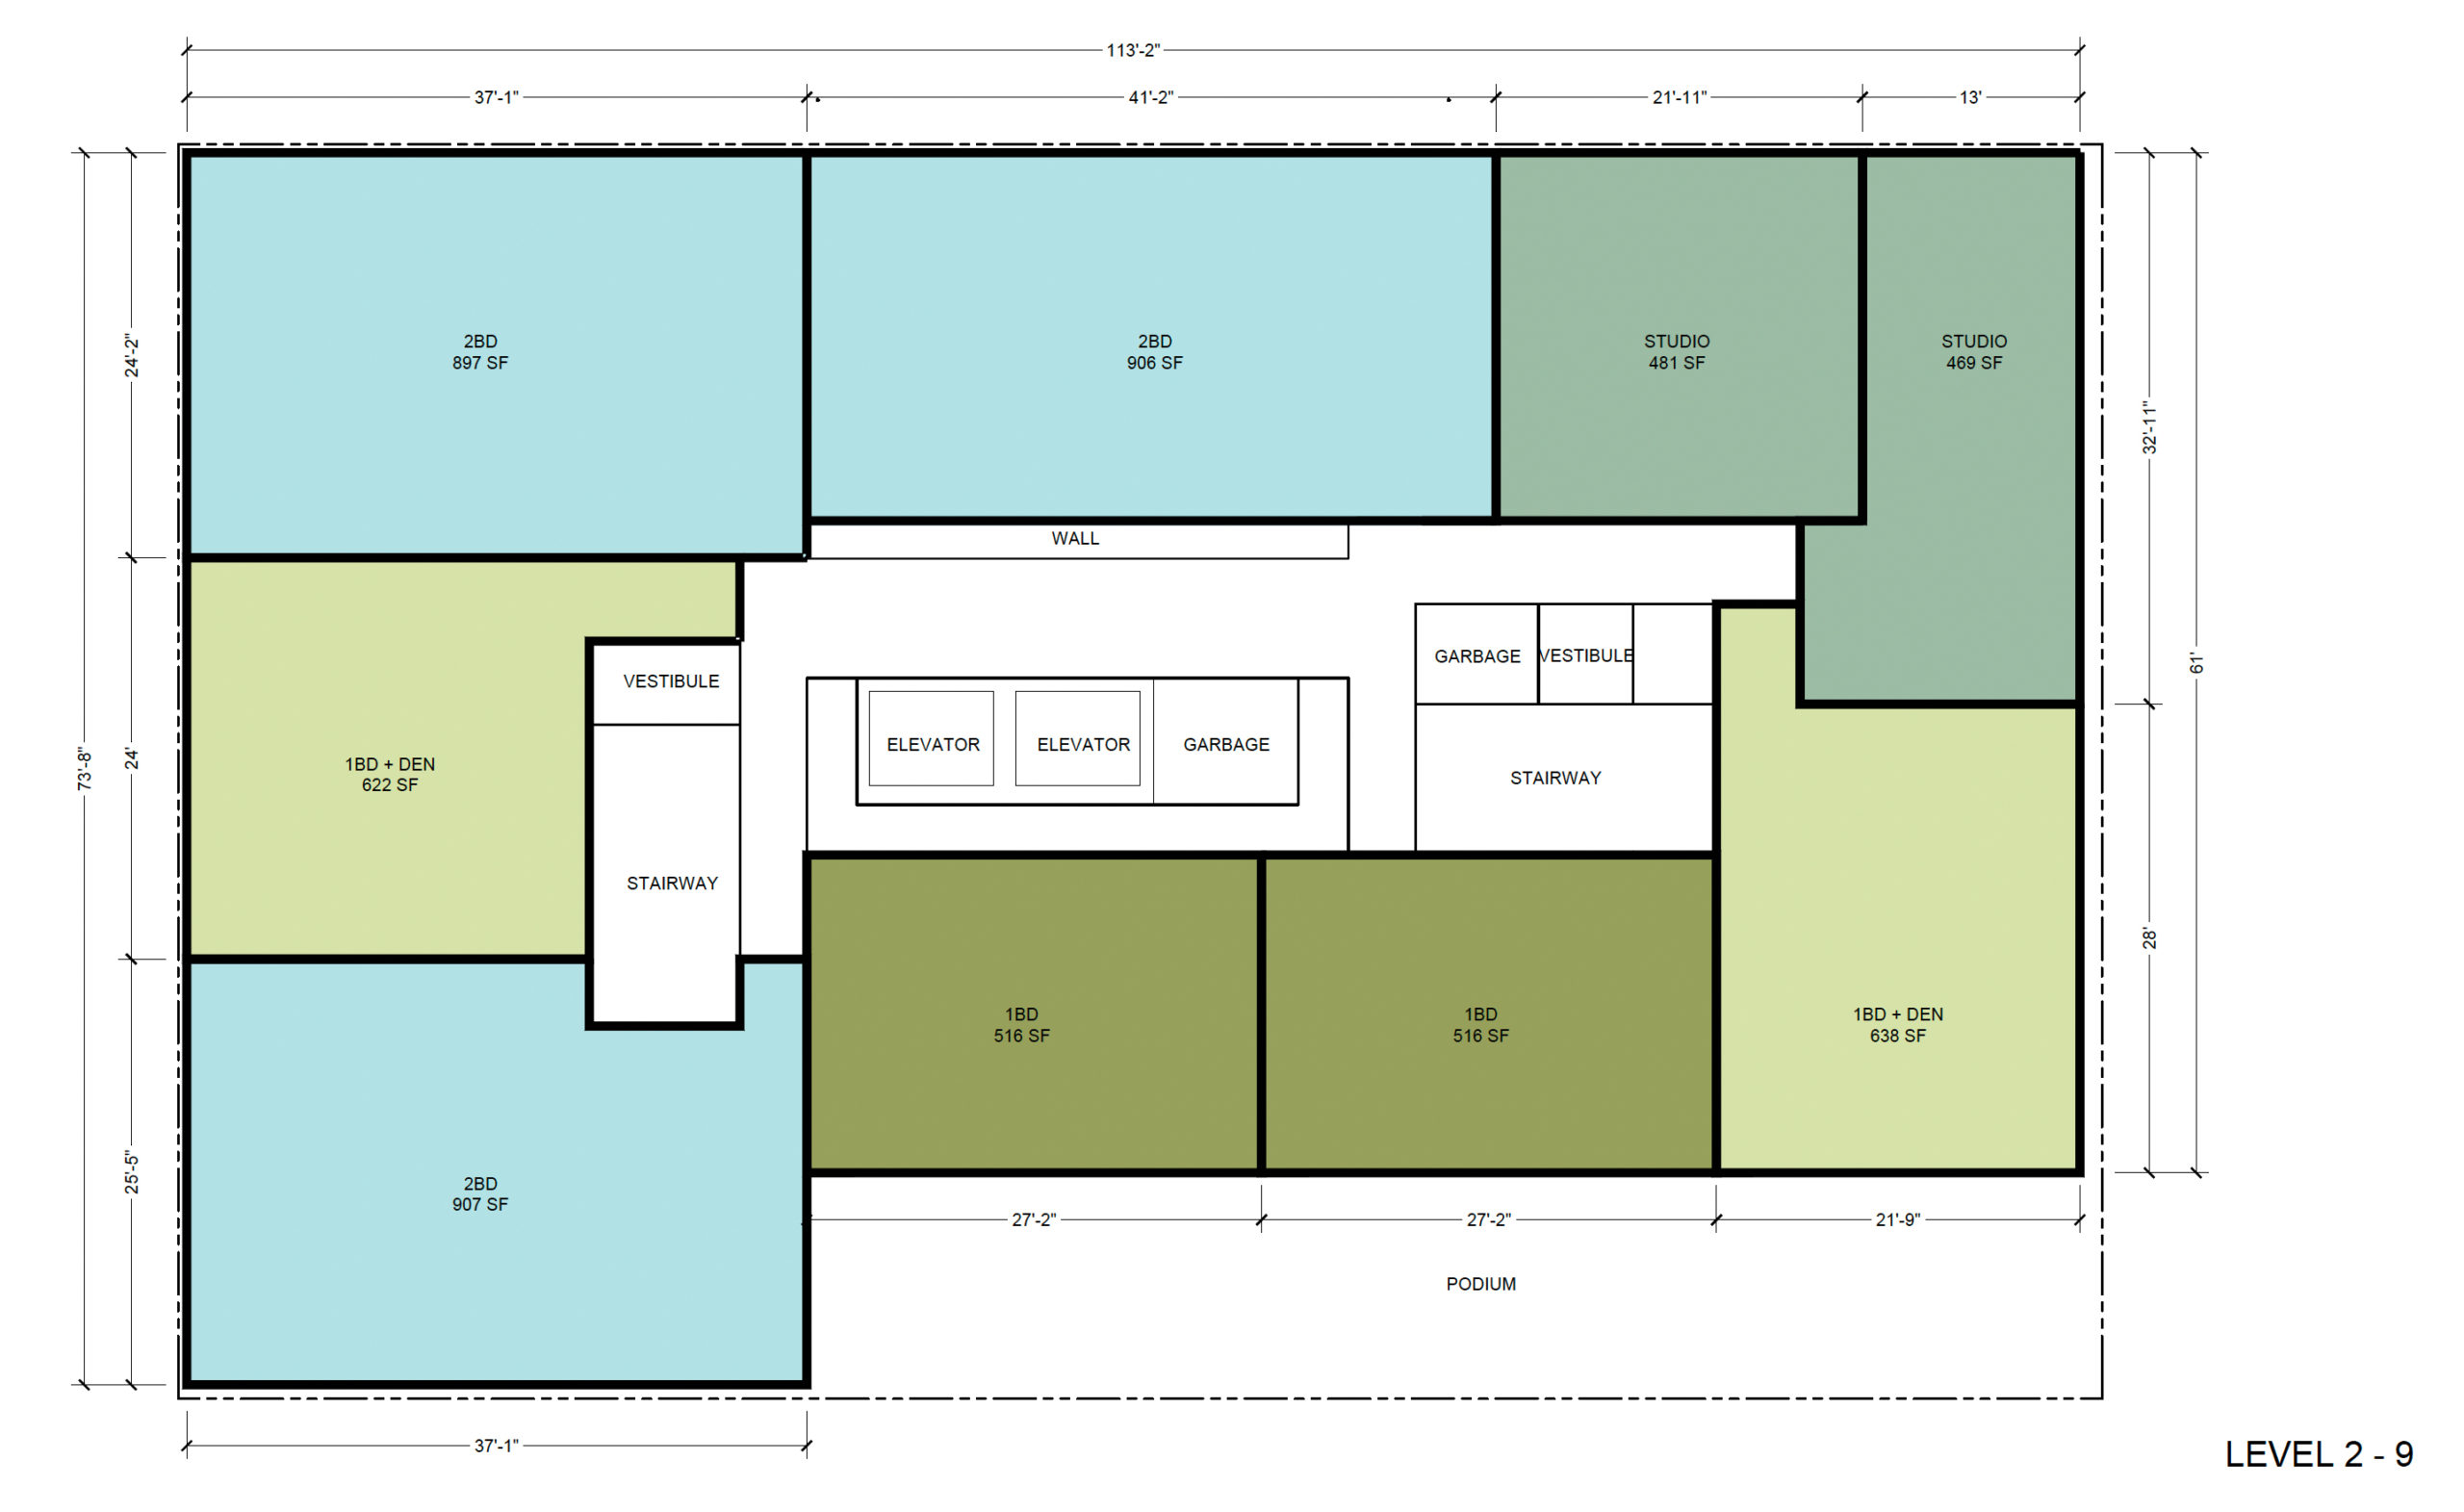 300 5th Street floor plan for levels 2-9, illustration courtesy the SF Planning Department